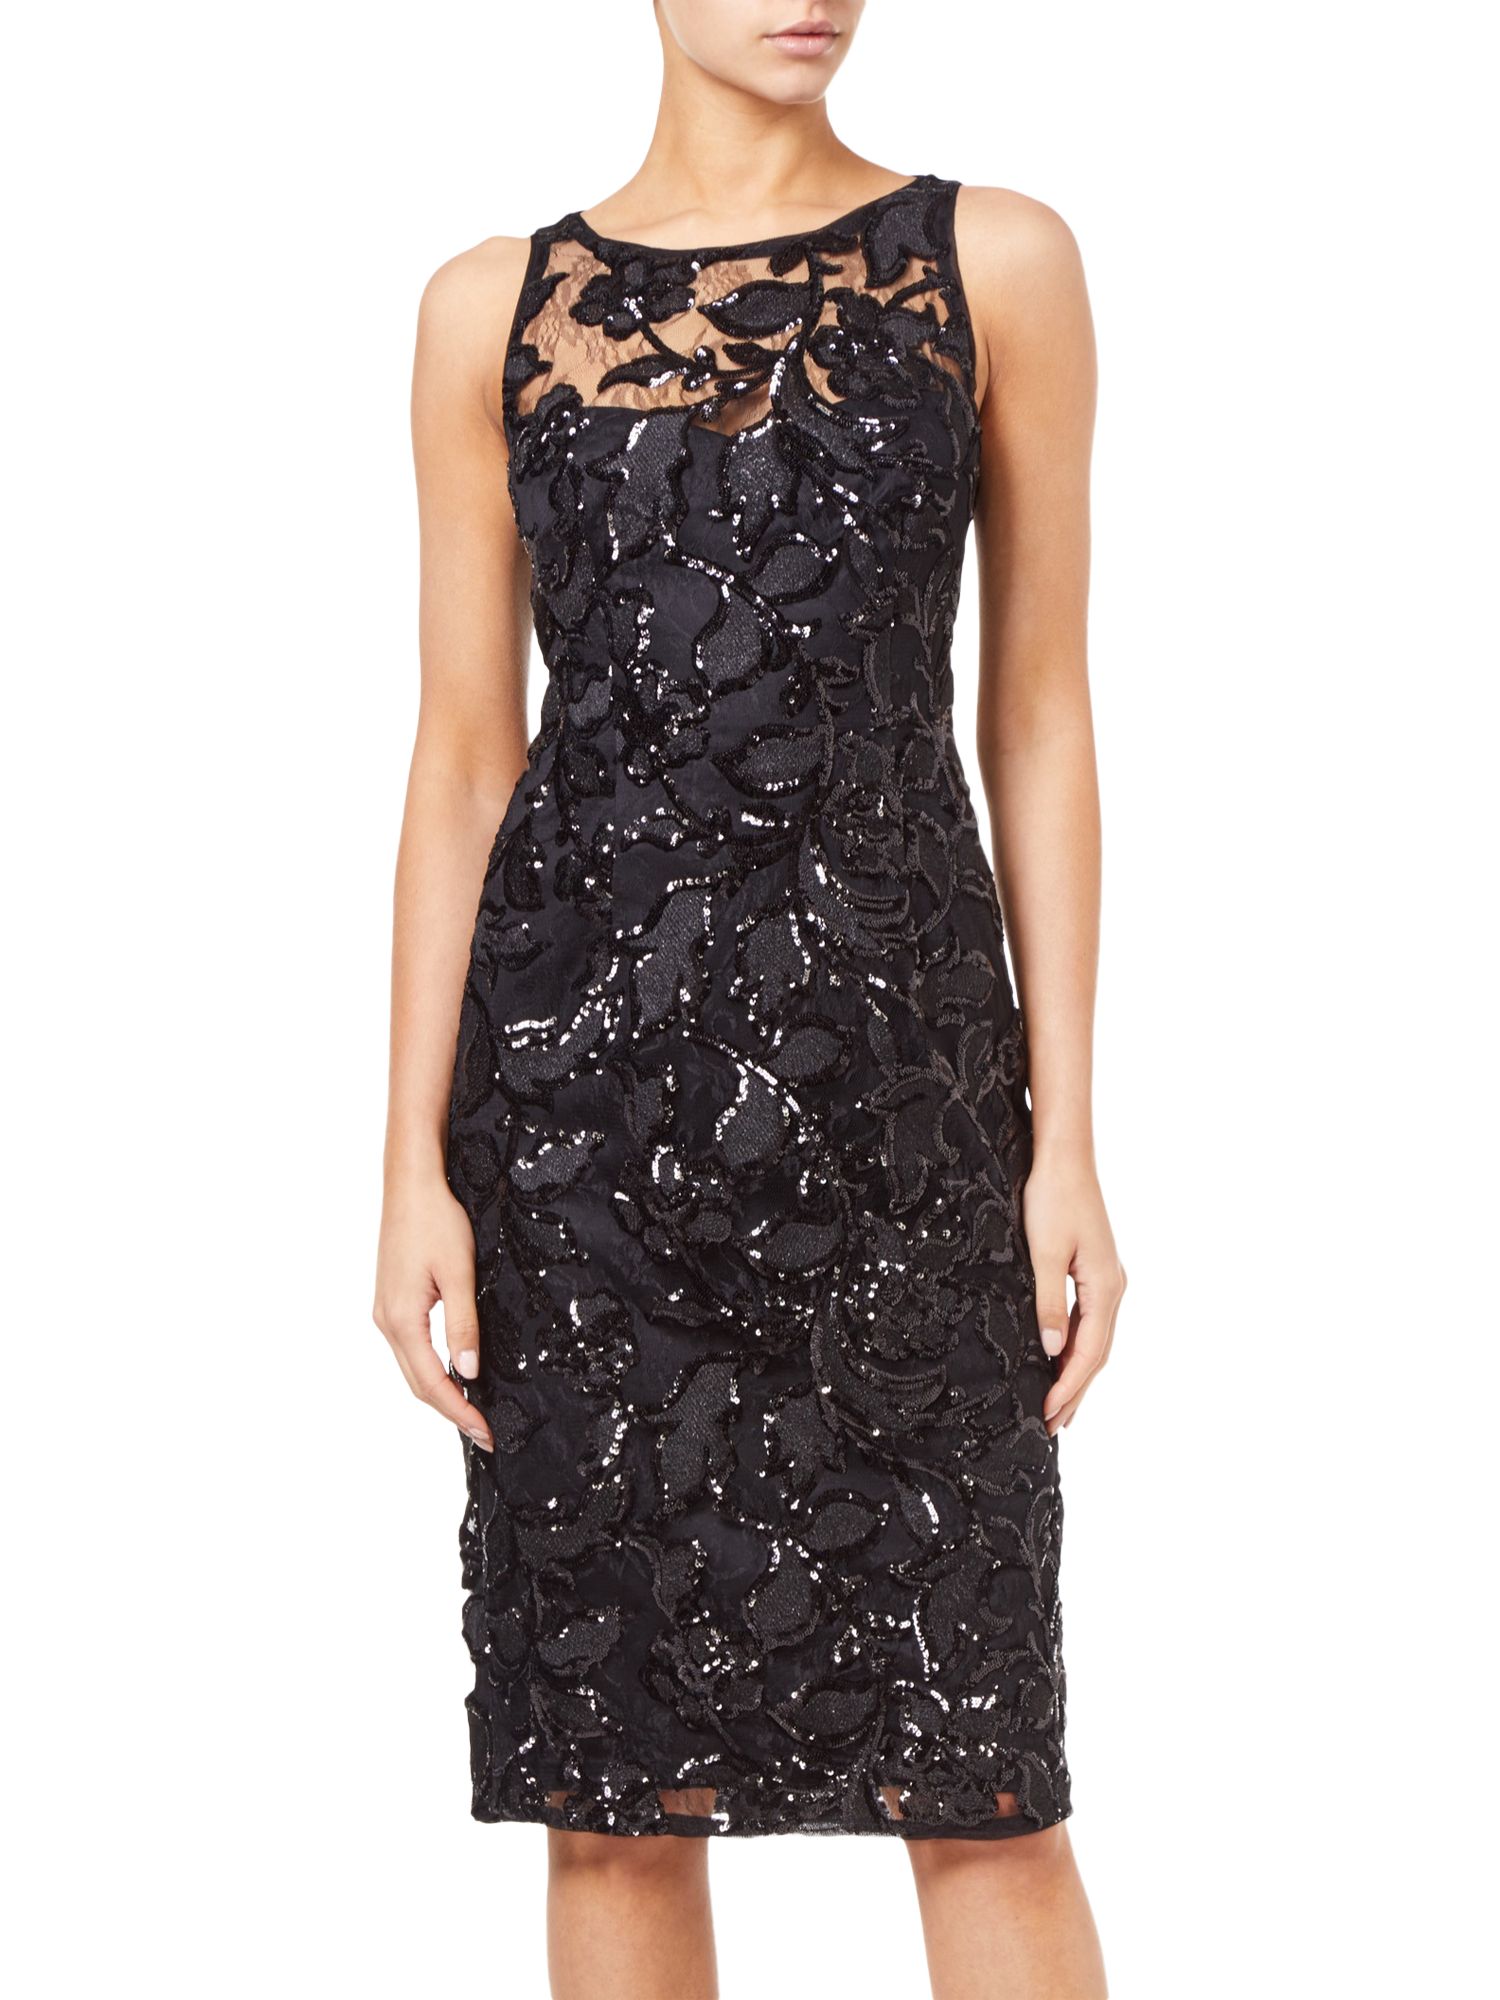 Adrianna Papell Sequin Embroidered Sheath Dress, Black at John Lewis ...